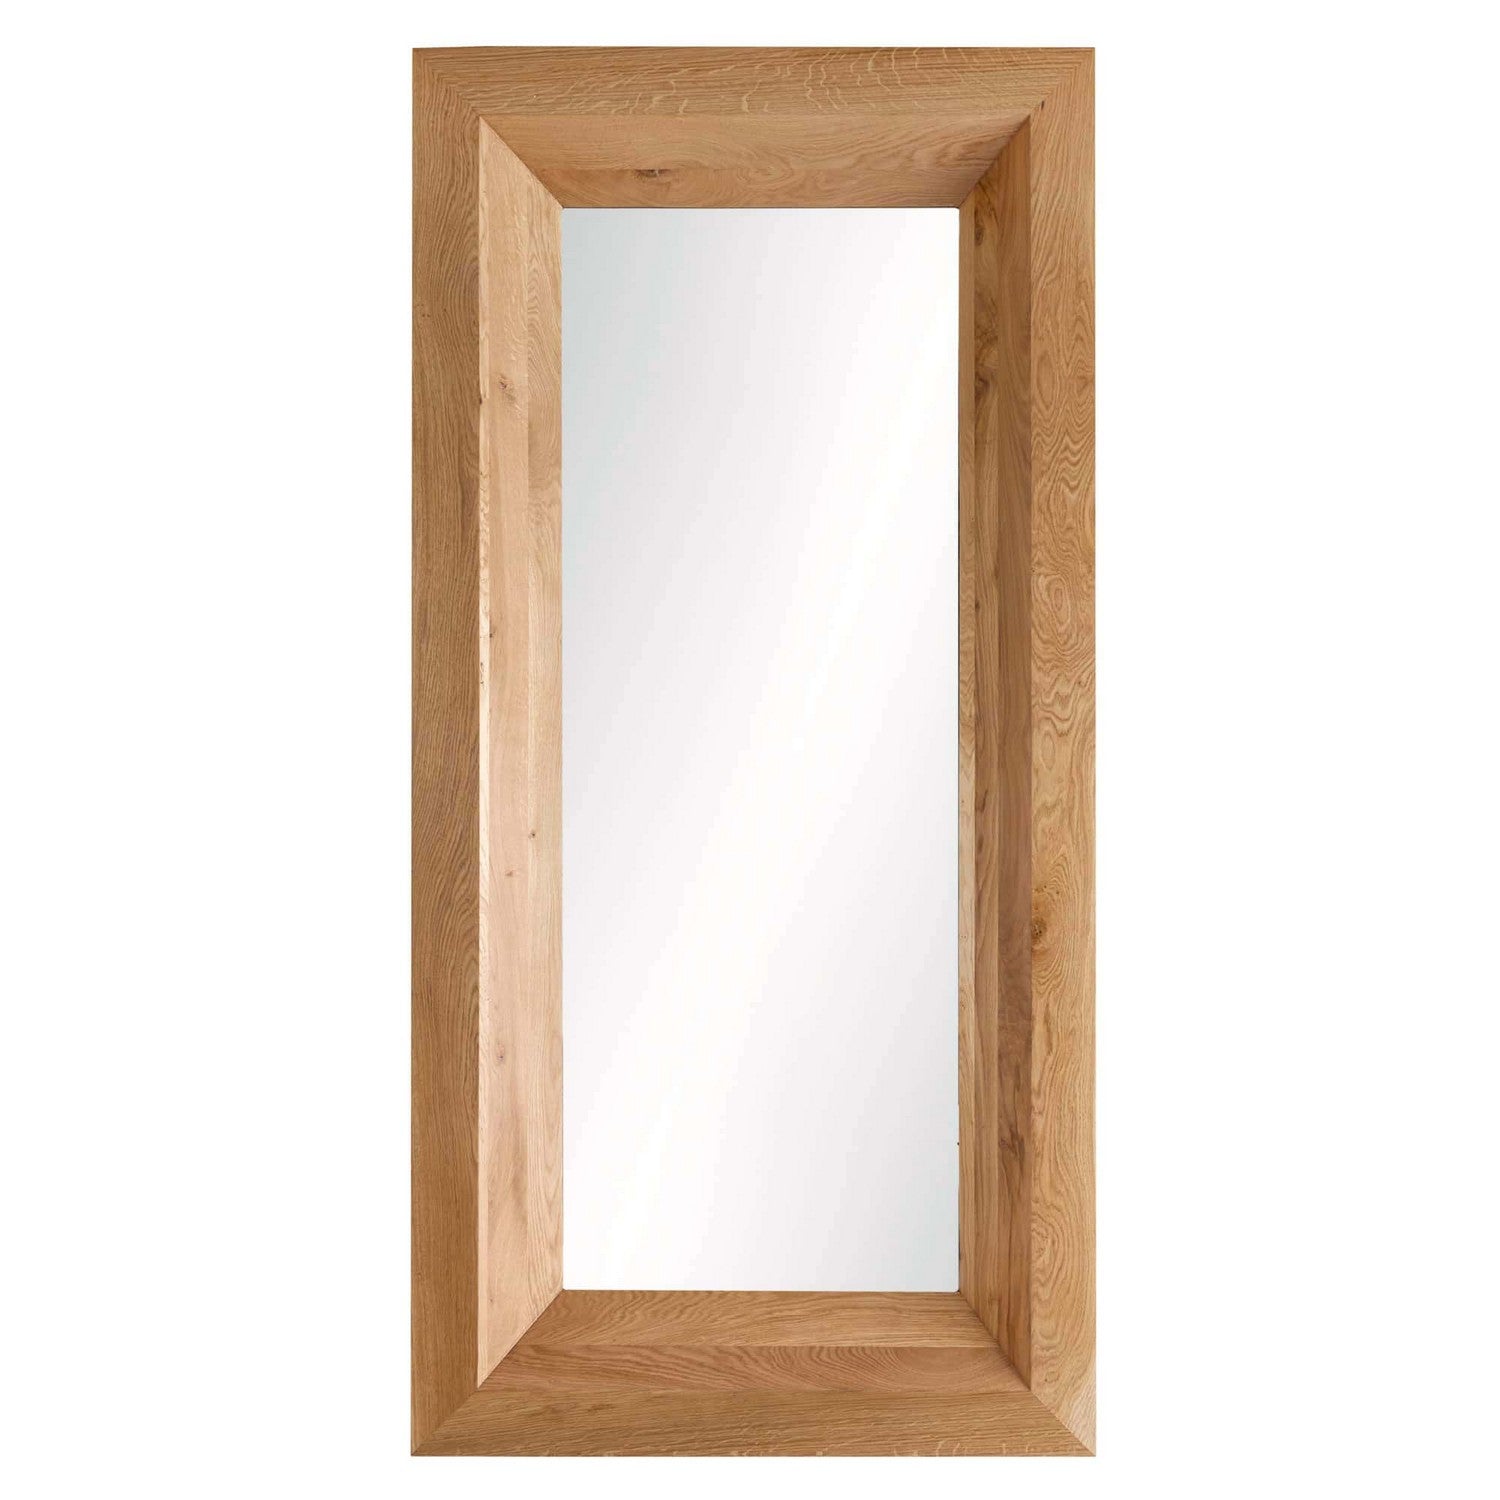 Floor Mirror from the Jenison collection in Blonde finish